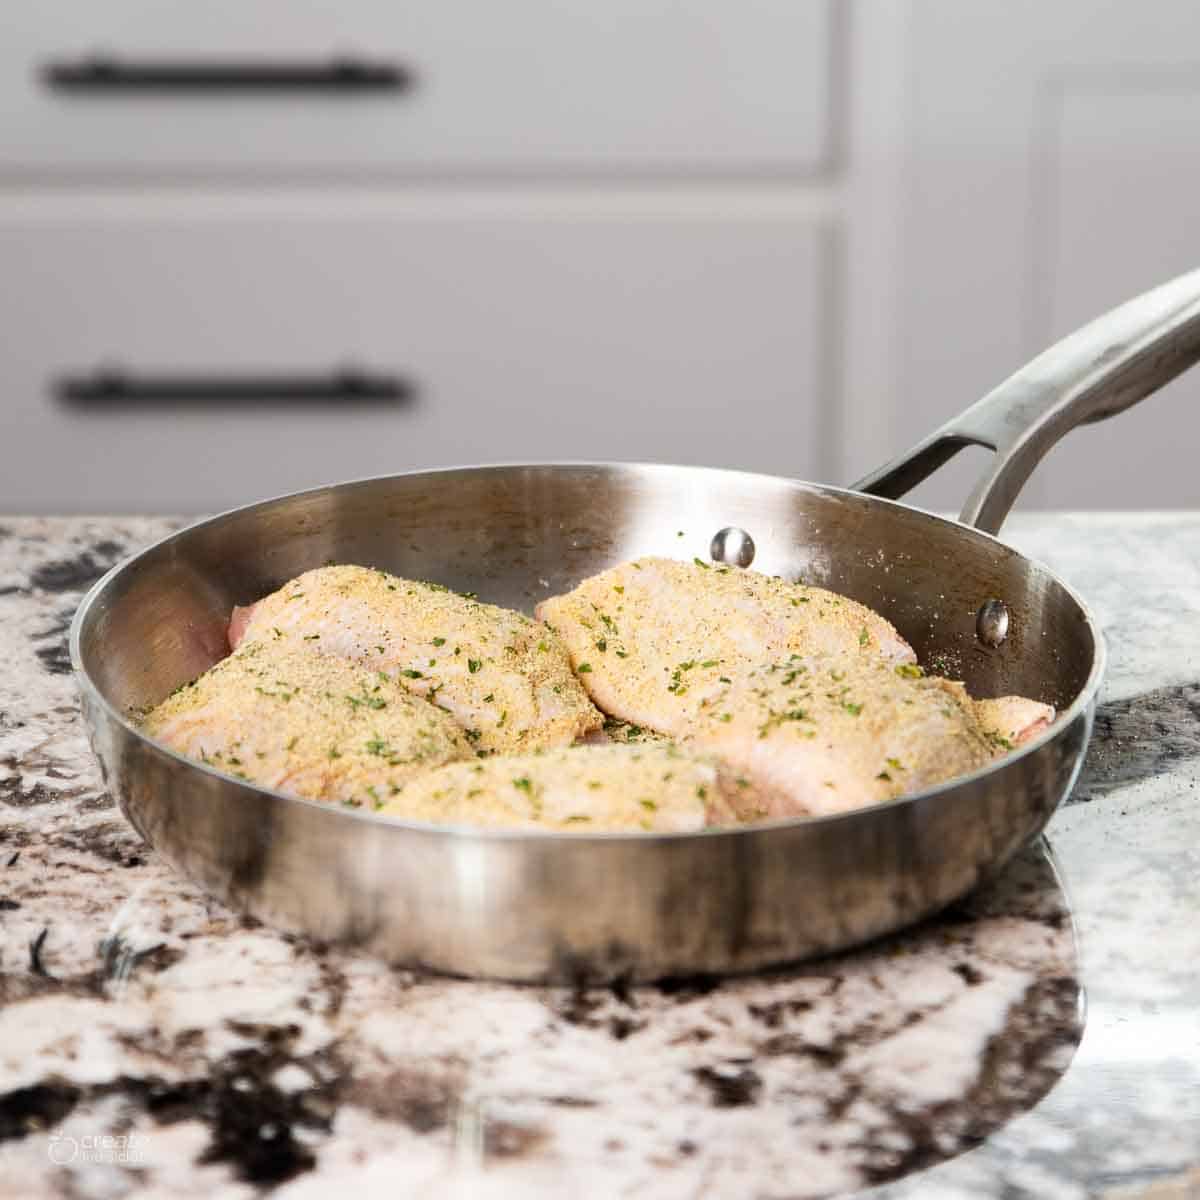 Uncooked, seasoned chicken thighs in a skillet.